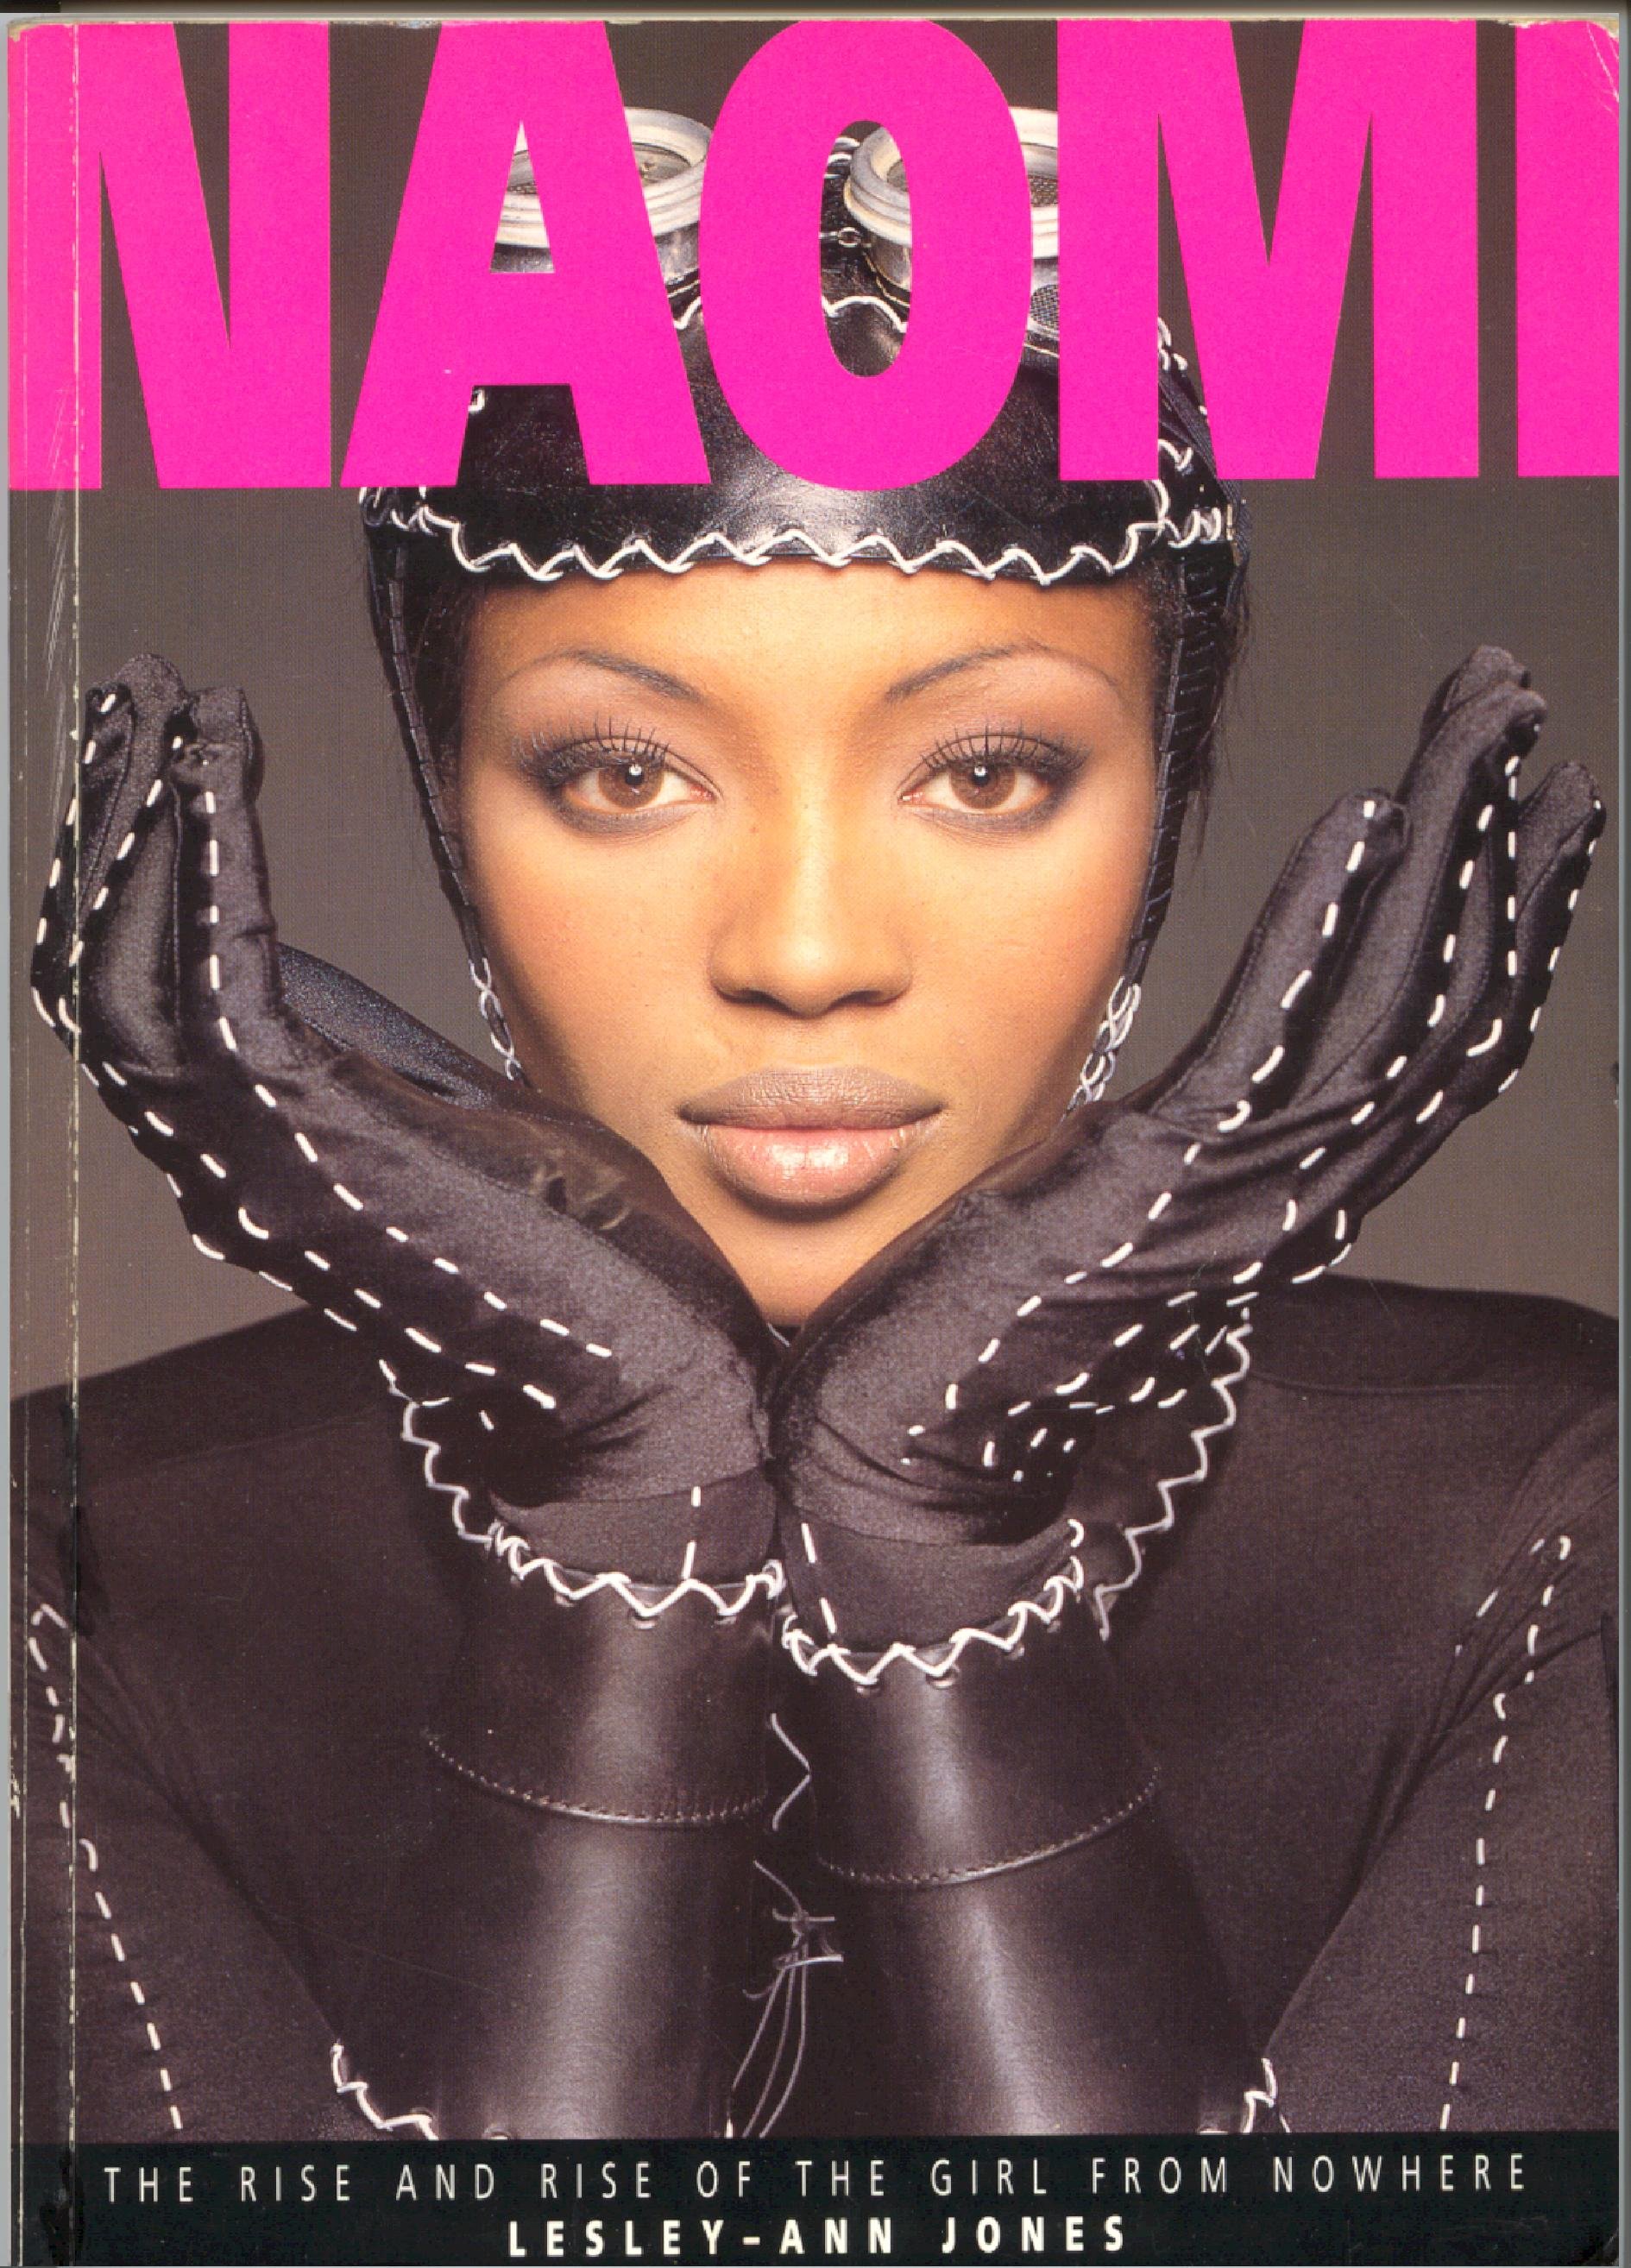 whitaker-malem-fashion-naomi-campbell-terry-o'-neill-formed-leather-neck-corset-headgear-cuffs-02.jpg